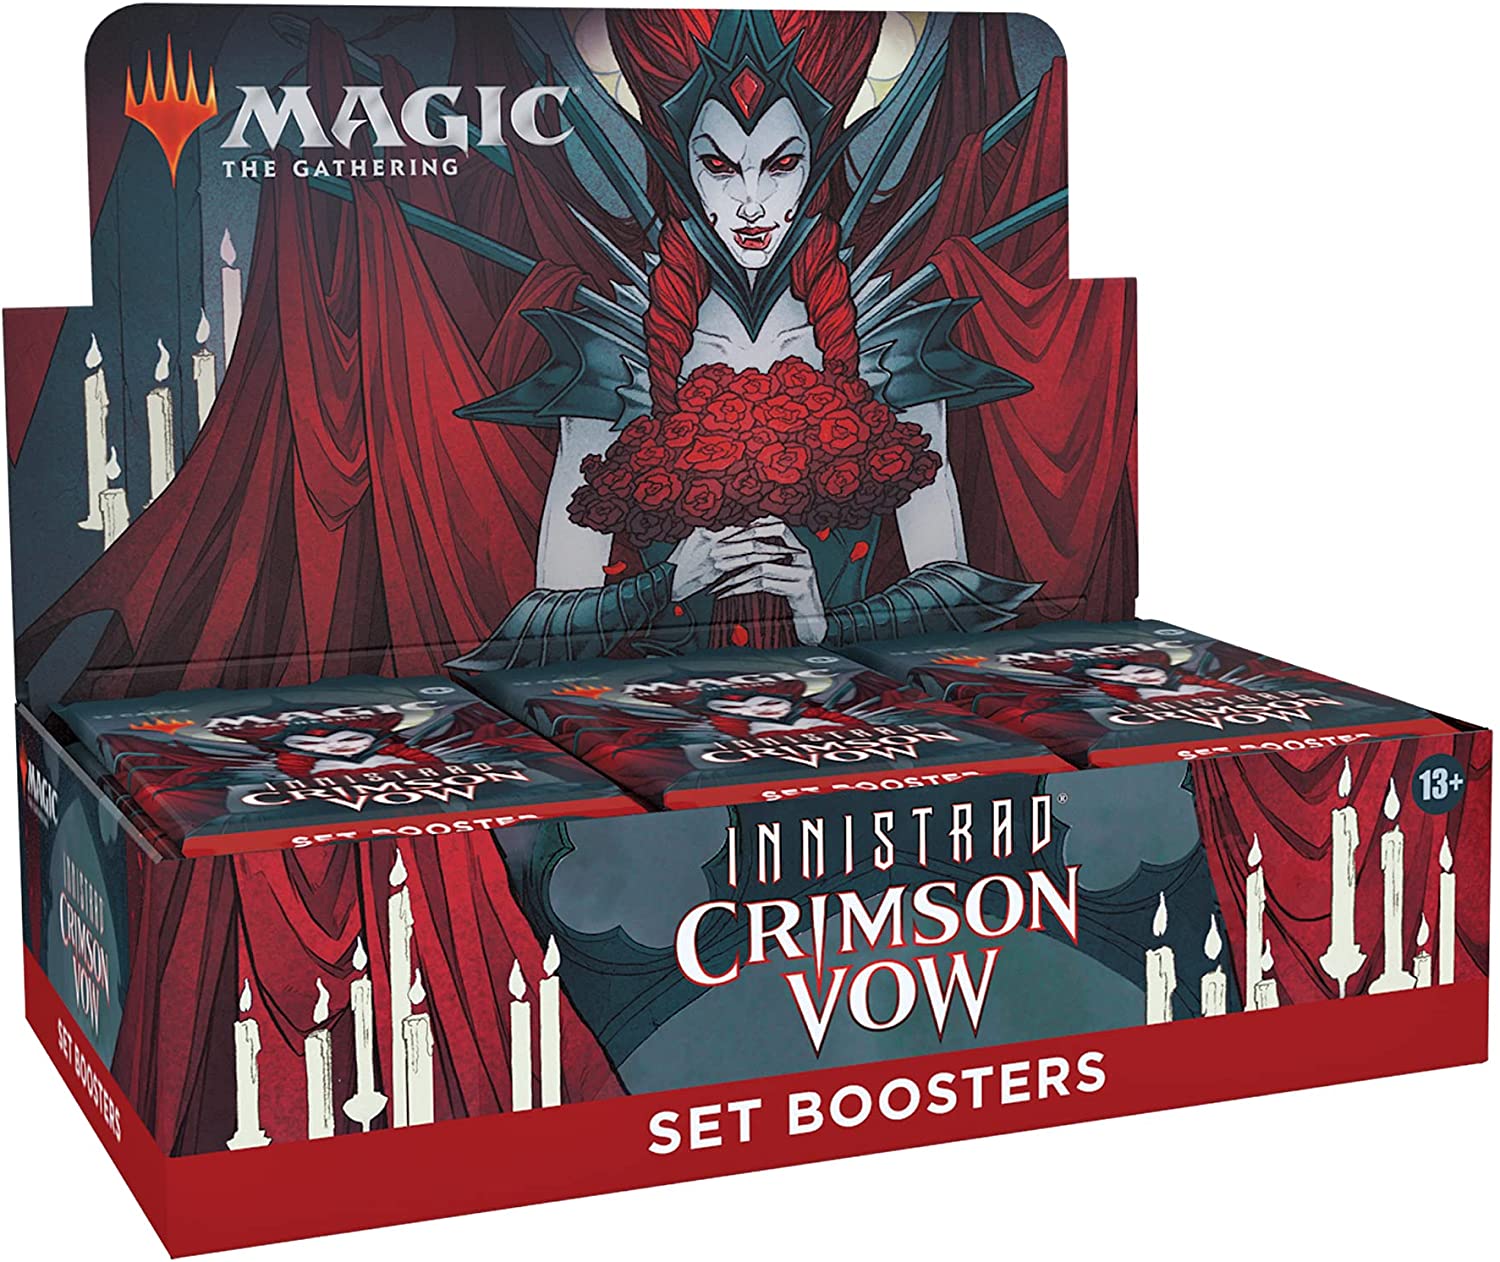 Meta-Games Unlimited - After a crazy weekend and selling out of most of the  new Magic set, I'm happy to say that Ikoria boxes are available again. Not  only that, we also